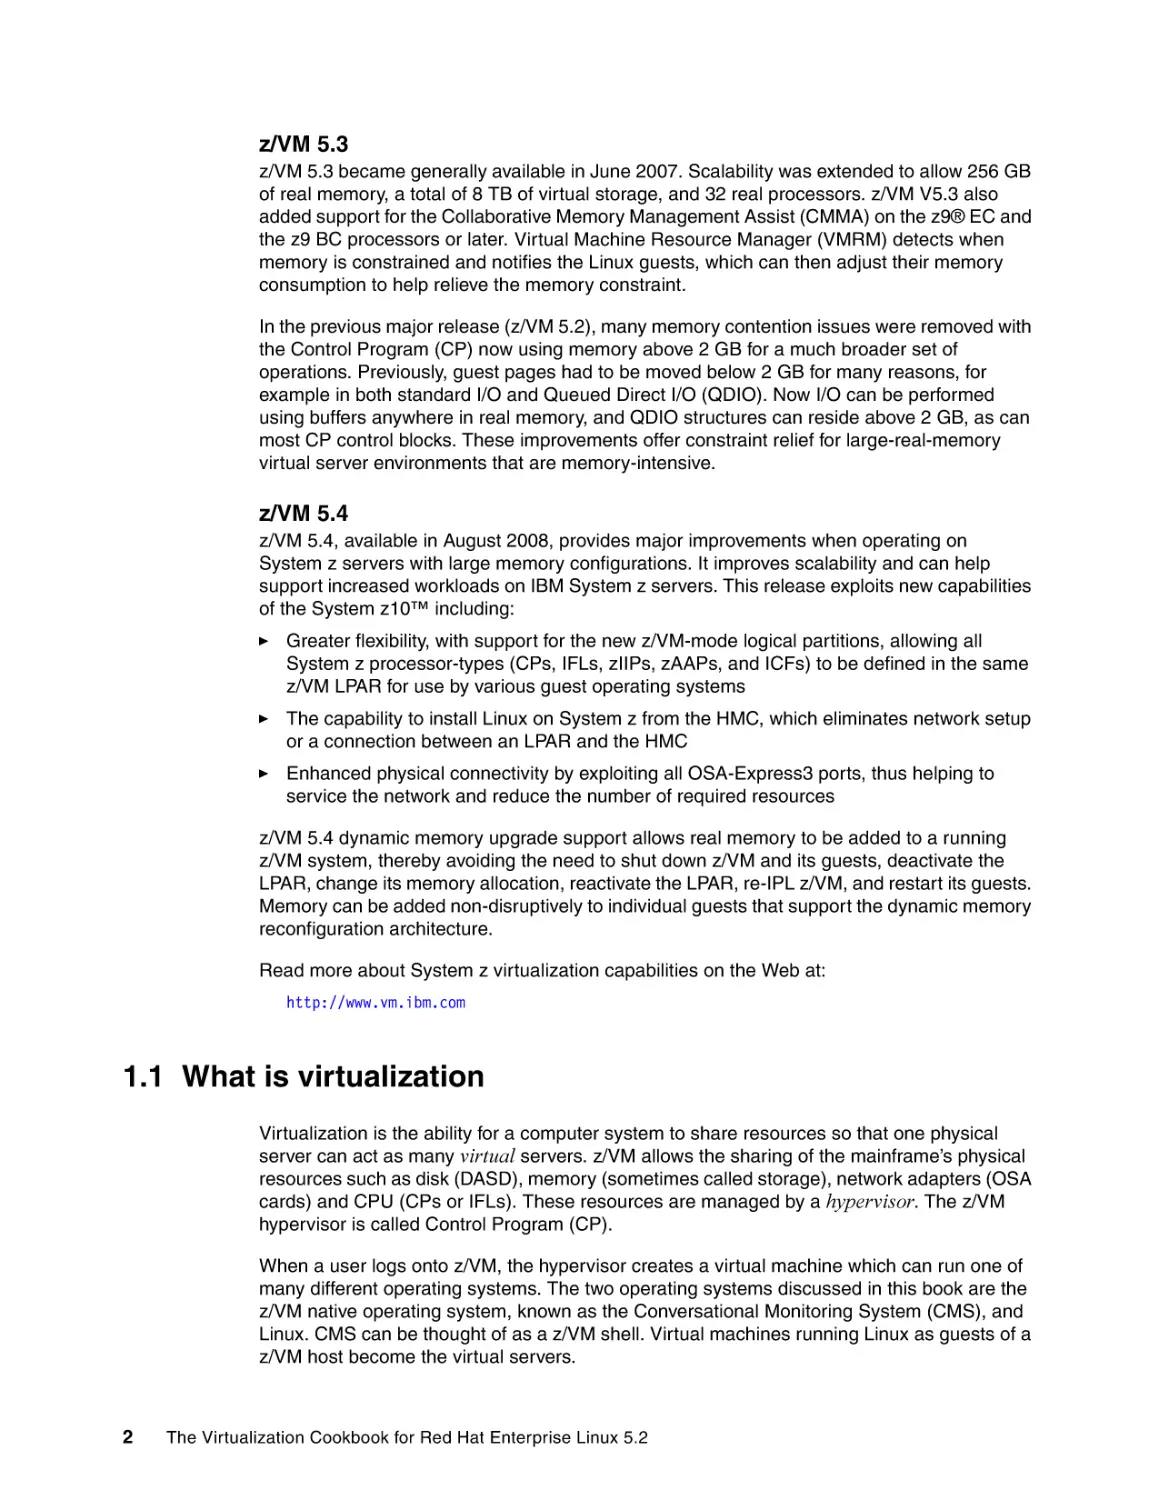 1.1 What is virtualization